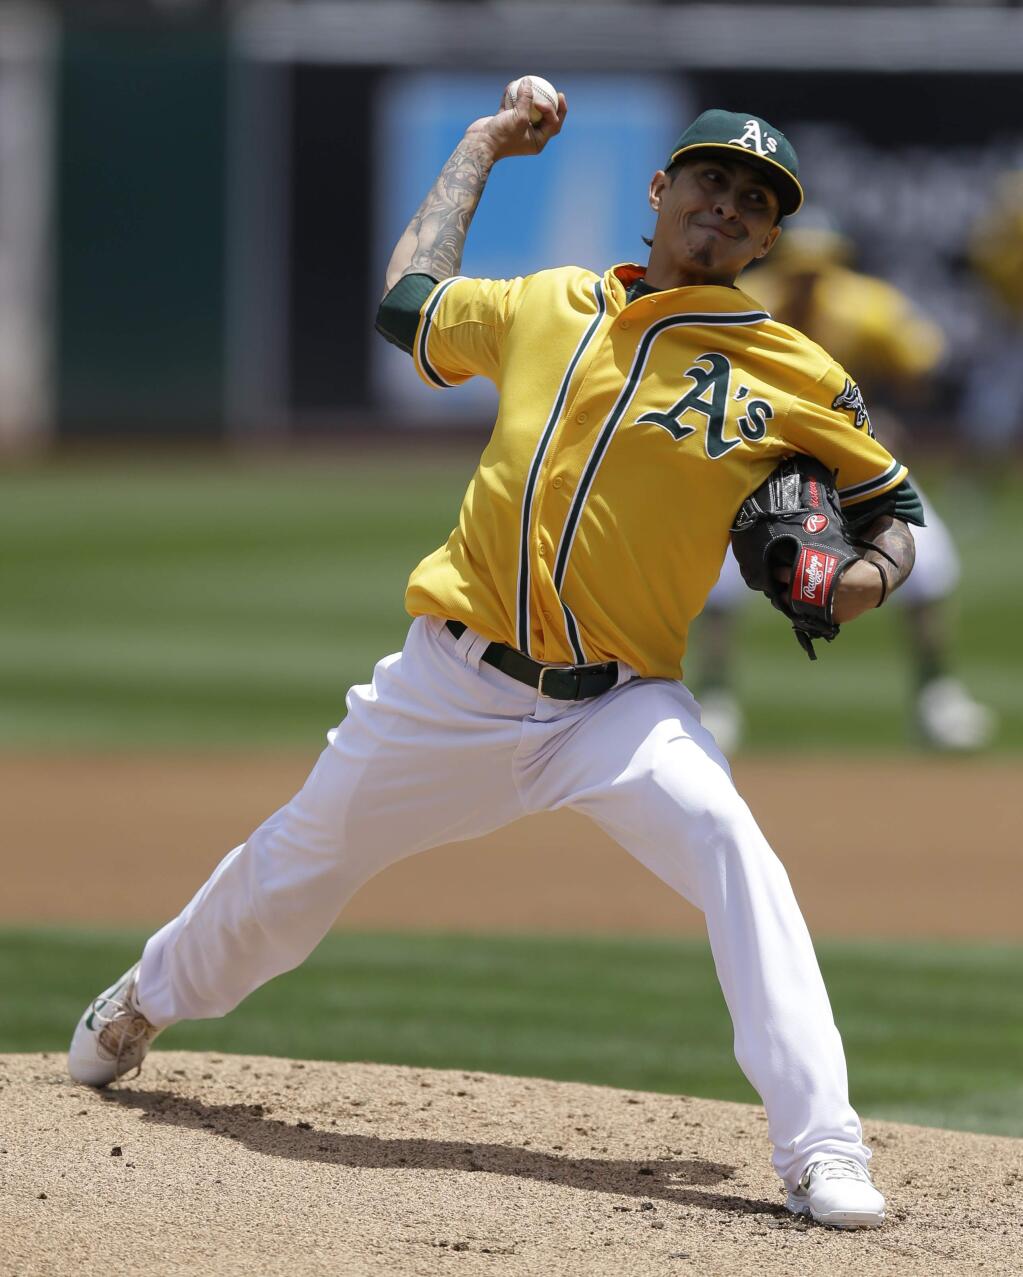 Oakland Athletics' Jesse Chavez works against the New York Yankees in the first inning of a baseball game Sunday, May 31, 2015, in Oakland, Calif. (AP Photo/Ben Margot)